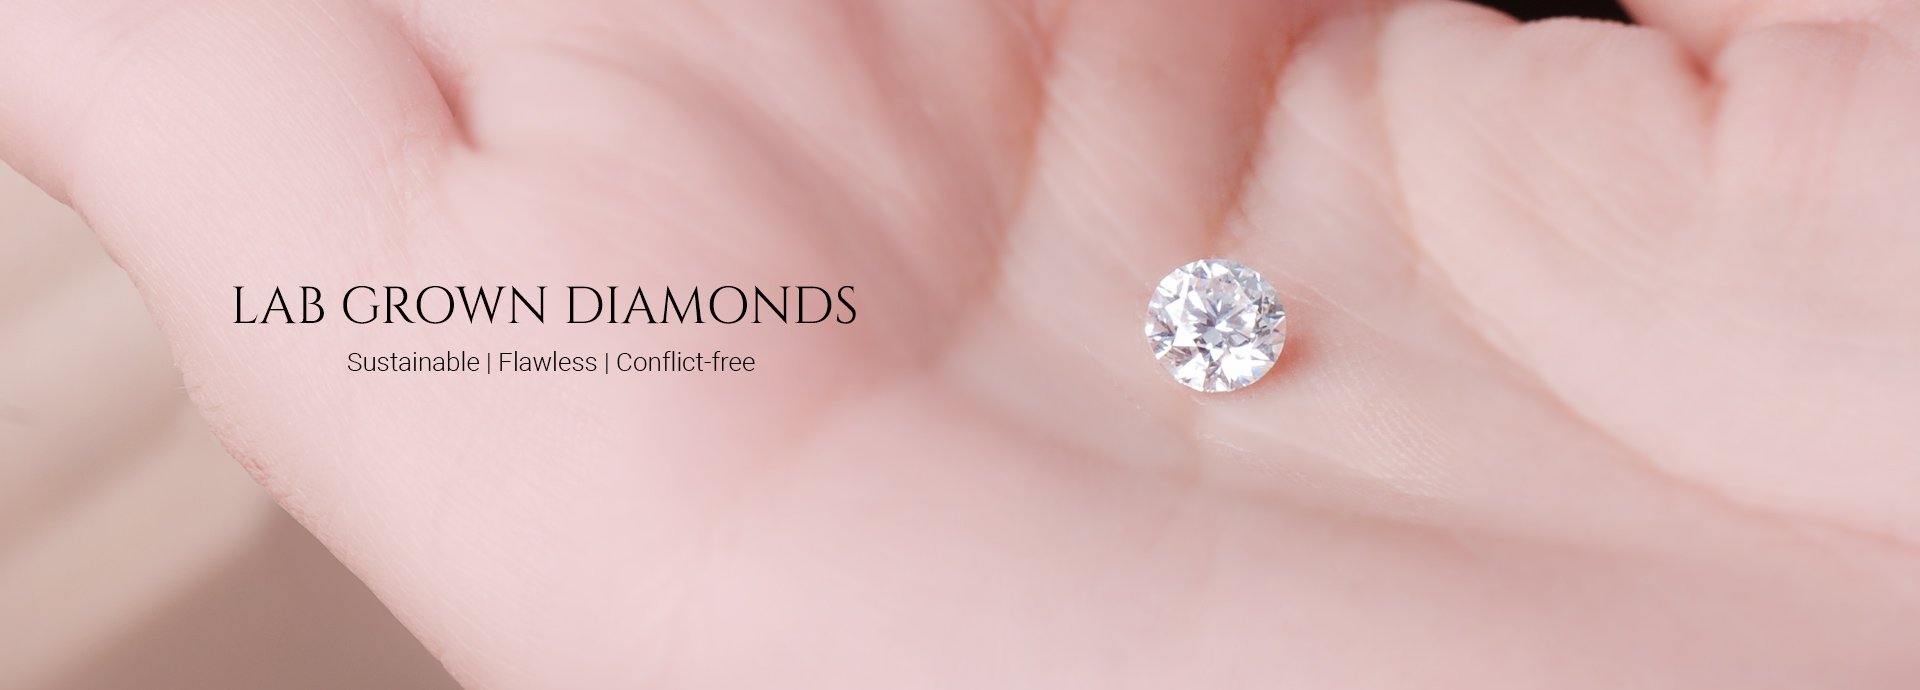 What is Lab Grown Diamonds?